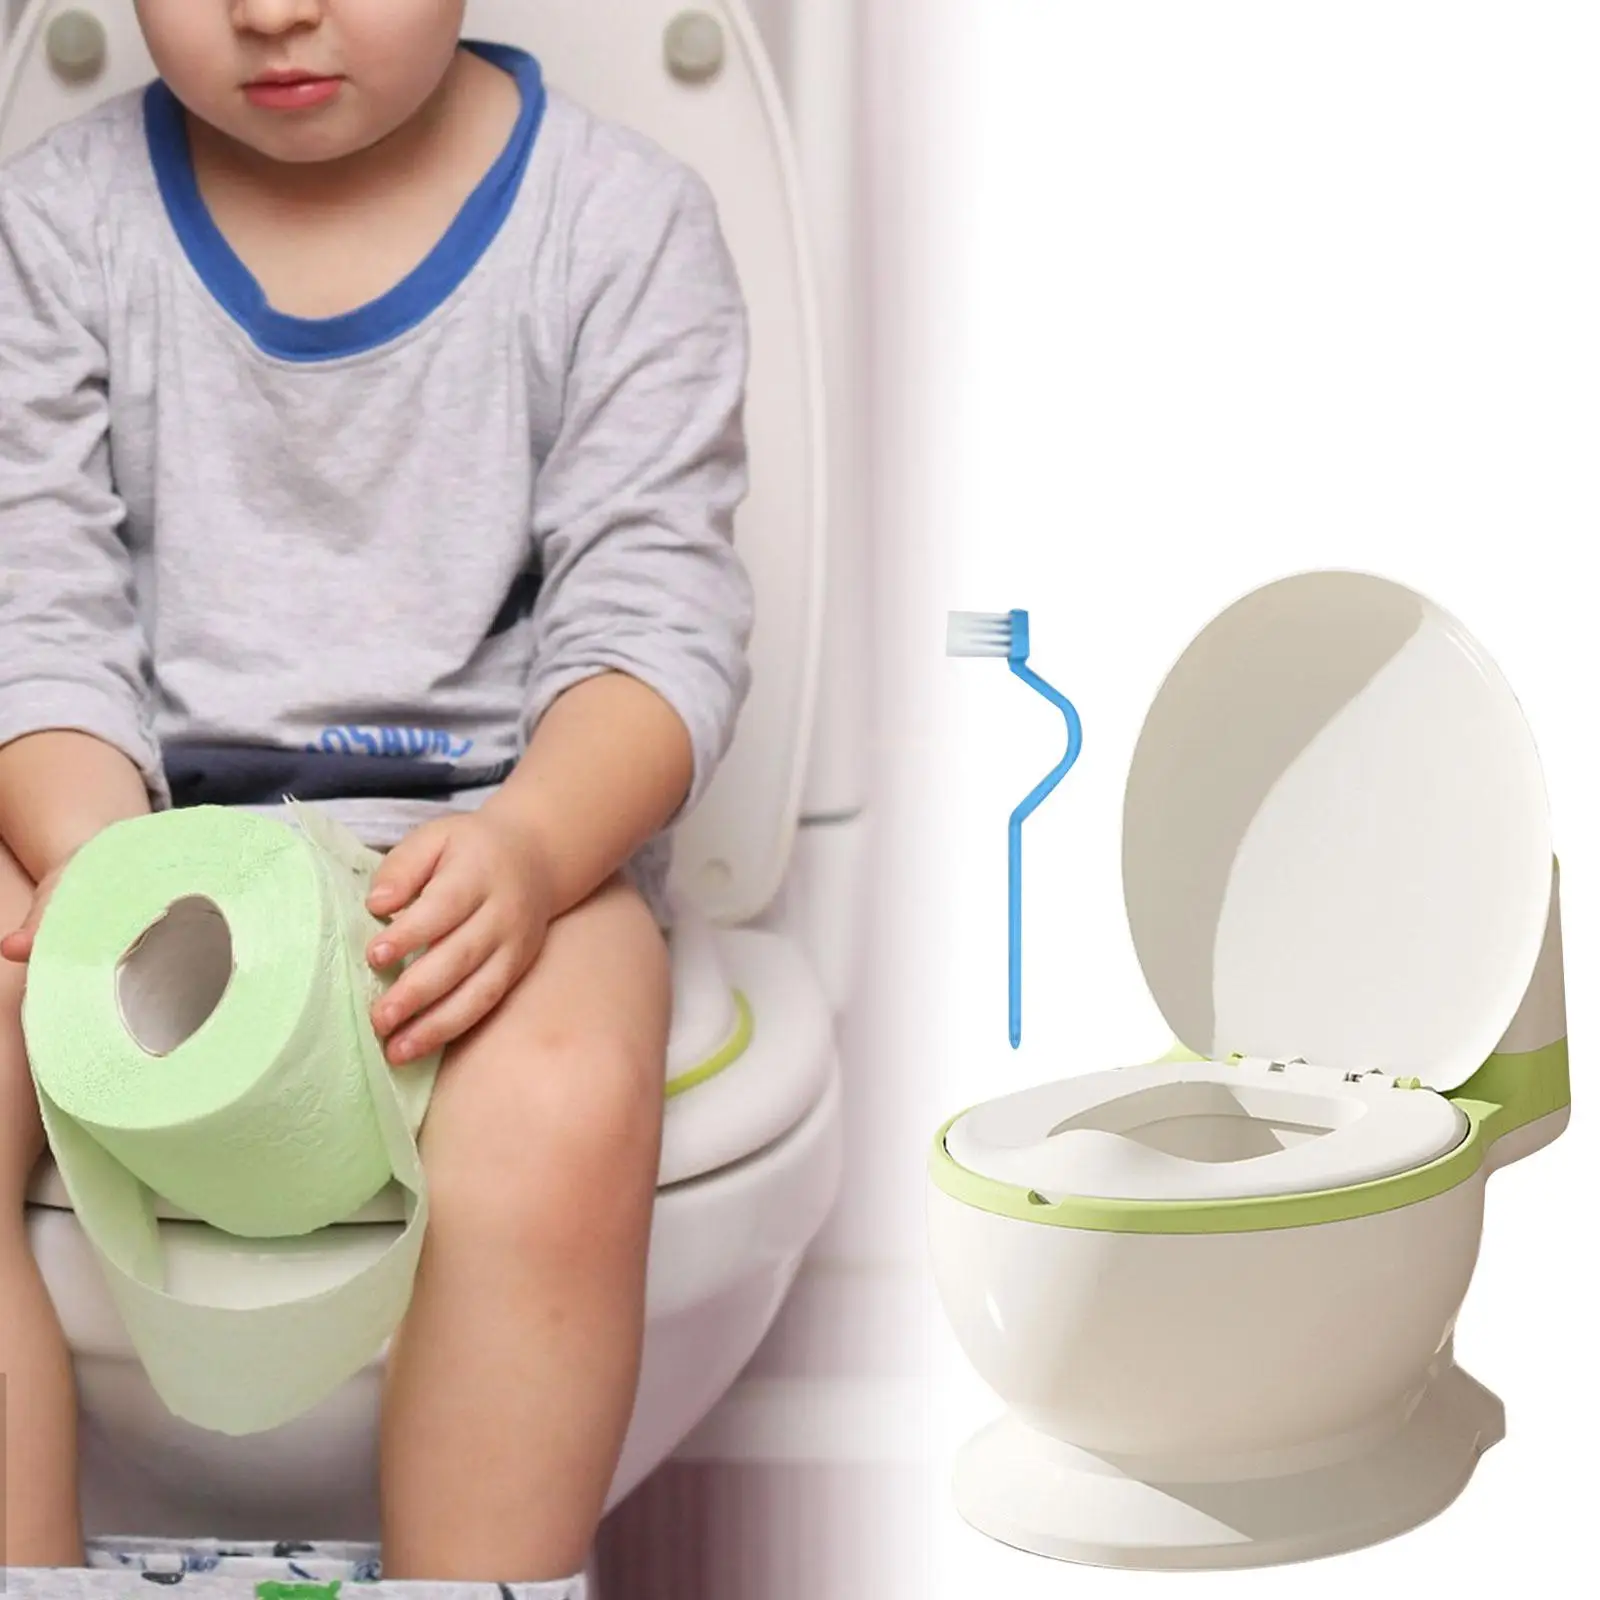 Baby Potty Toilet Compact Size with Spilling Guard Infants Toilet Seat Realistic Toilet Potty Seat for Bedroom Girls Boys Babies